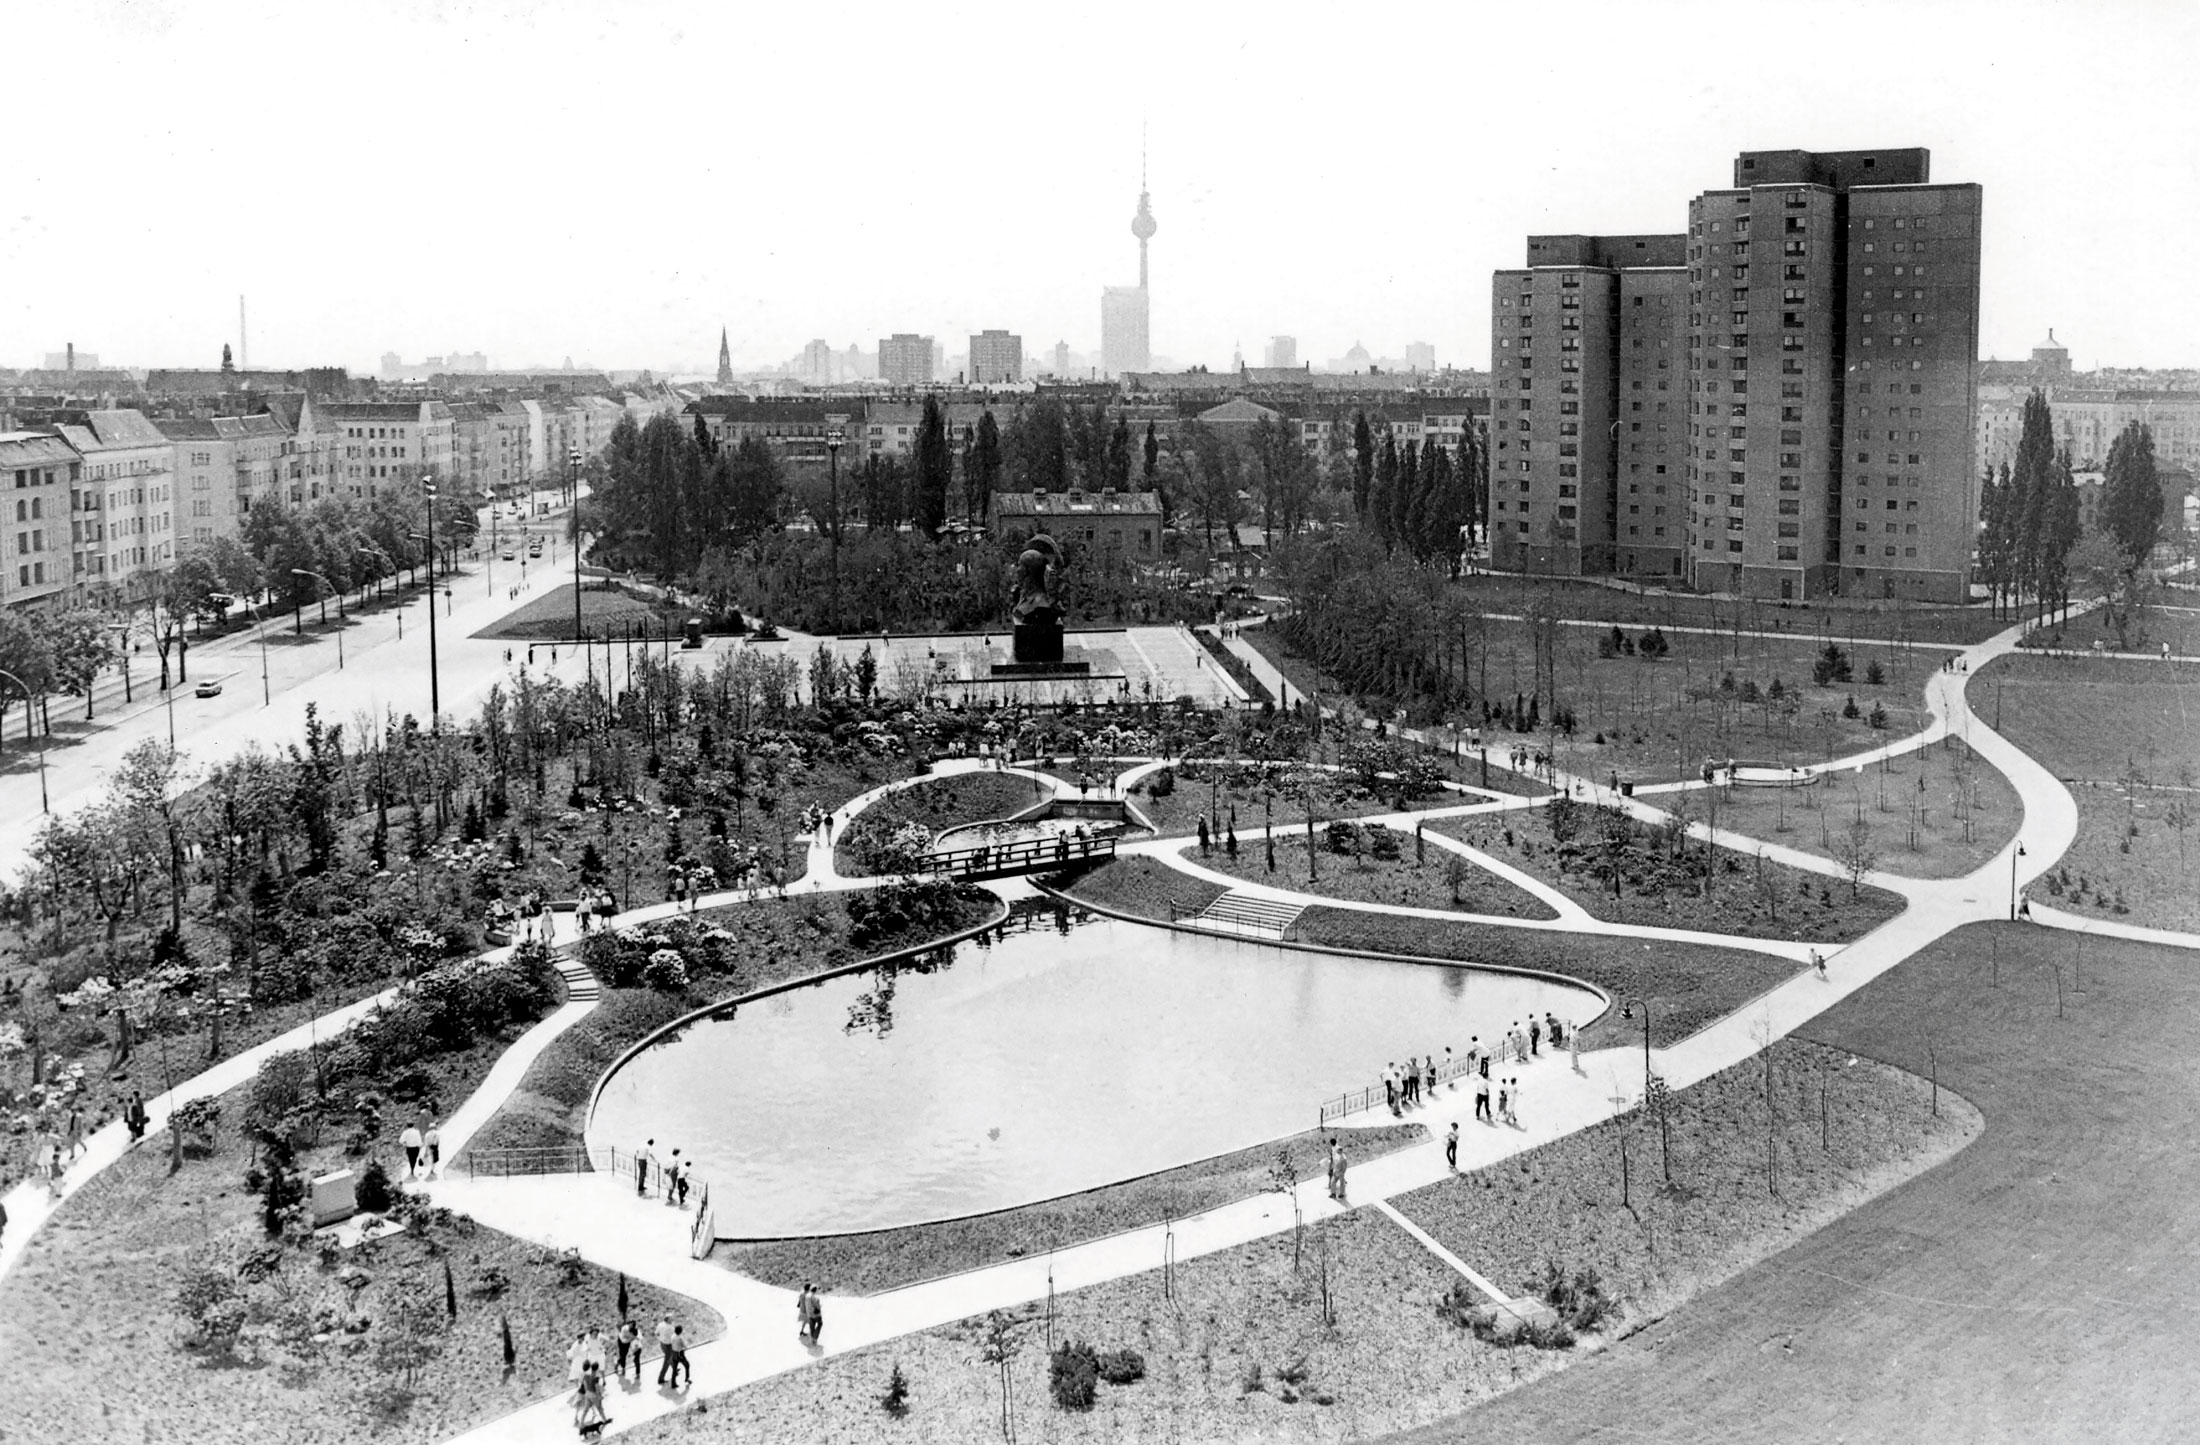 In addition to the central monument, the focal points of the park’s design were a pond with a rhododendron grove, a rose garden and playgrounds. View of the area, around 1986.